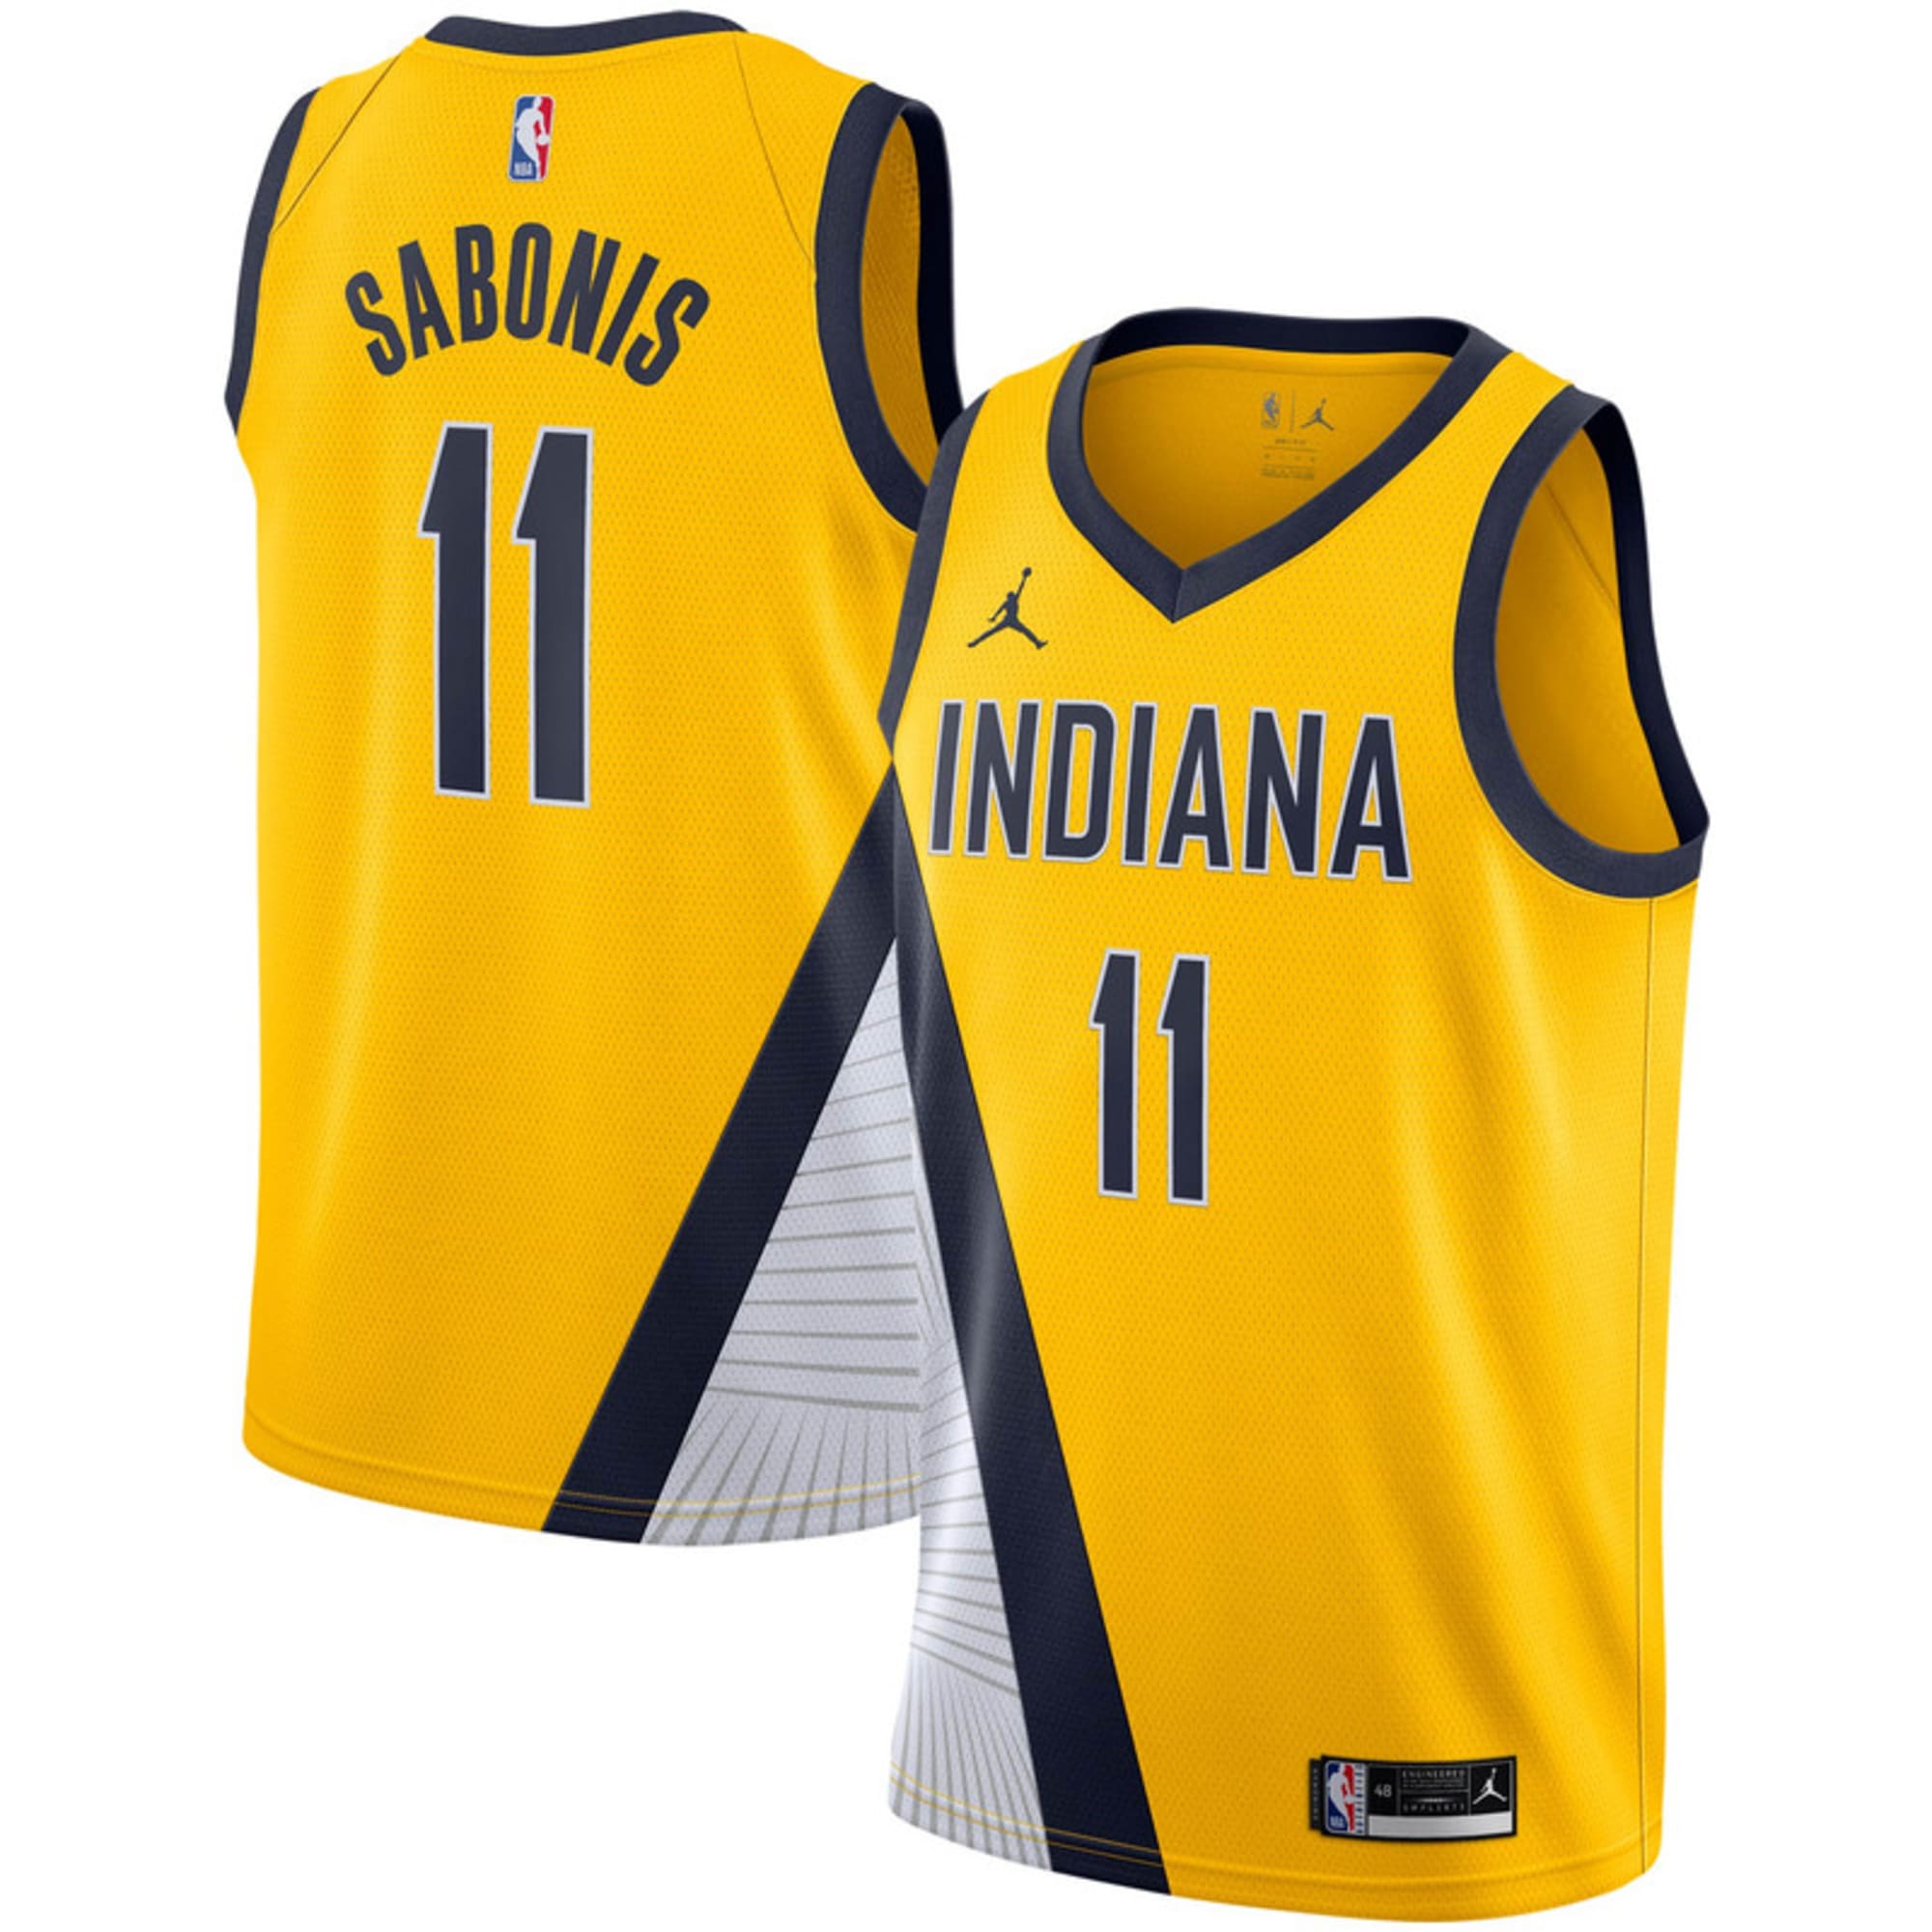 Designer blesses Pacers fans with beautiful concept jerseys